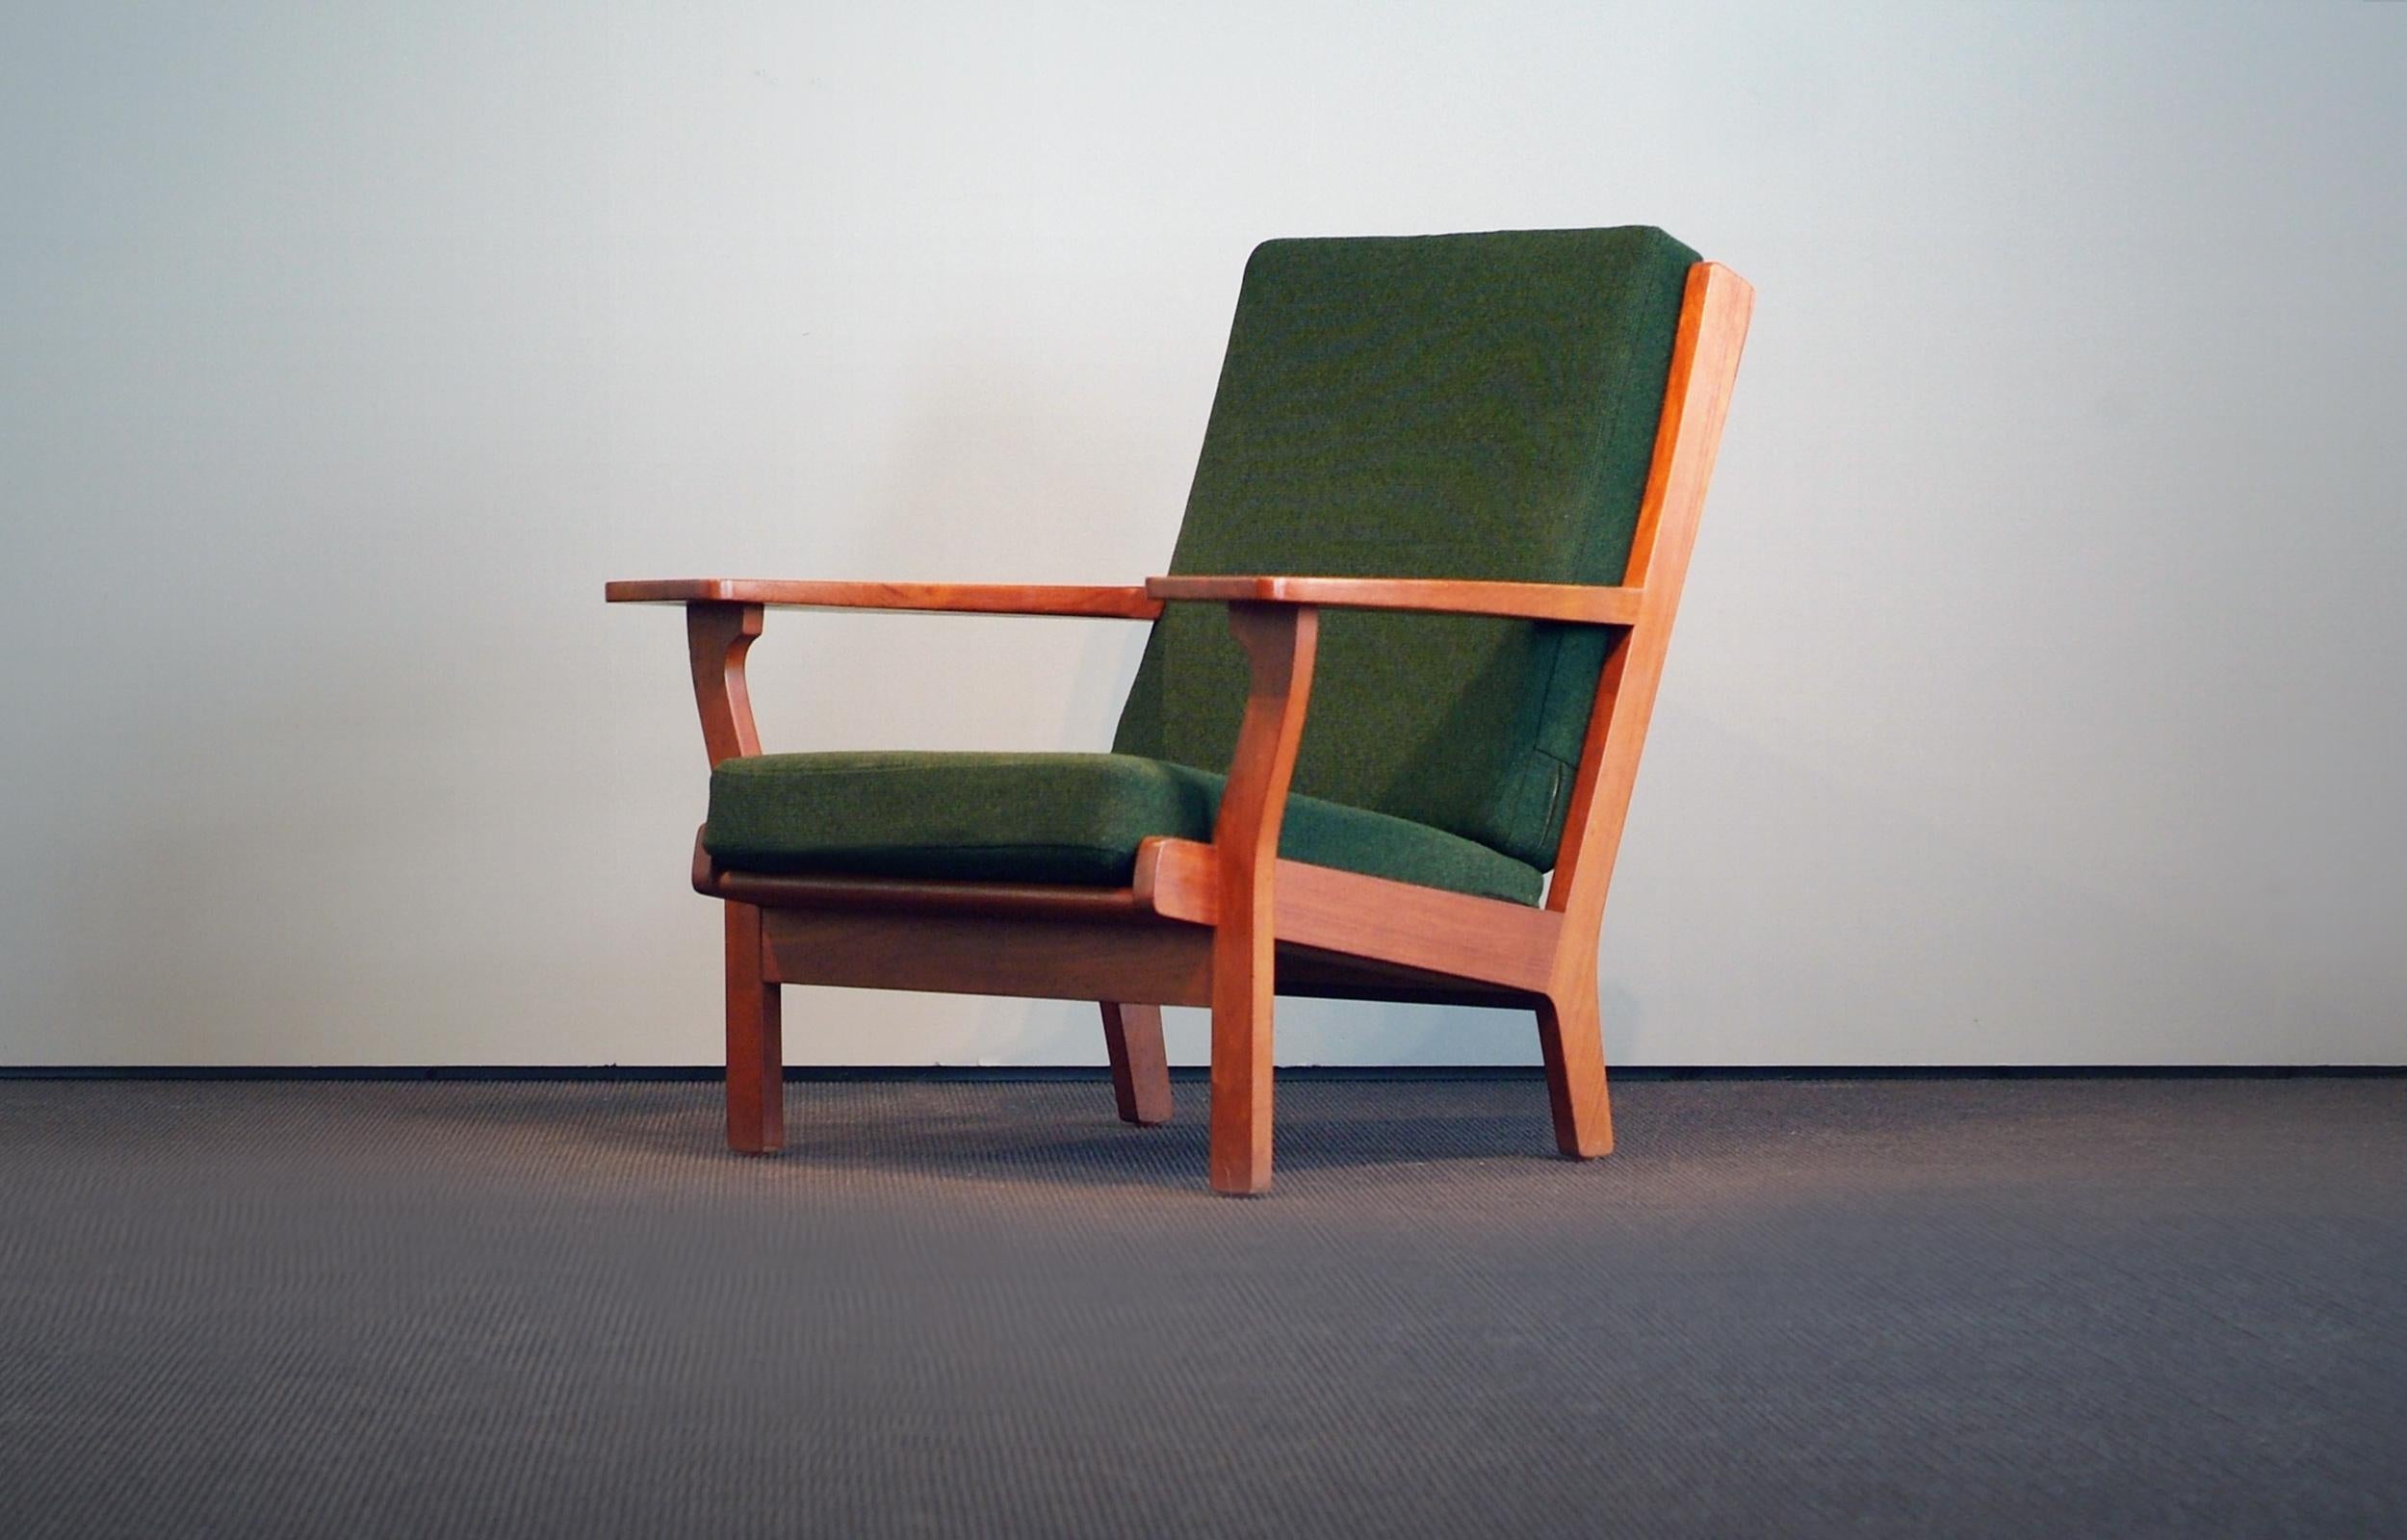 Rare Hans J. Wegner easy high back chair mod GE 330 produced by GETAMA Denmark in the 1960s. Original green fabric with frame of solid teak. Impressed GETAMA label. A wonderful and comfortable easy chair. 

Very, very good vintage condition with